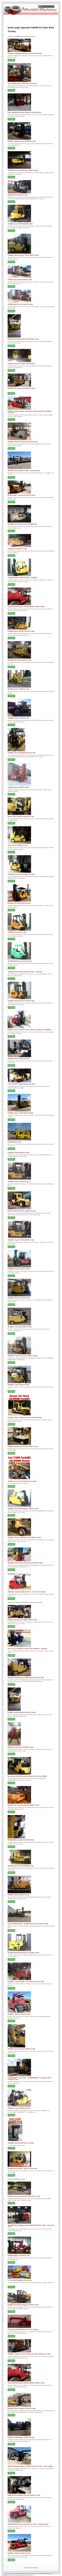 Large Capacity Forklifts For Sale